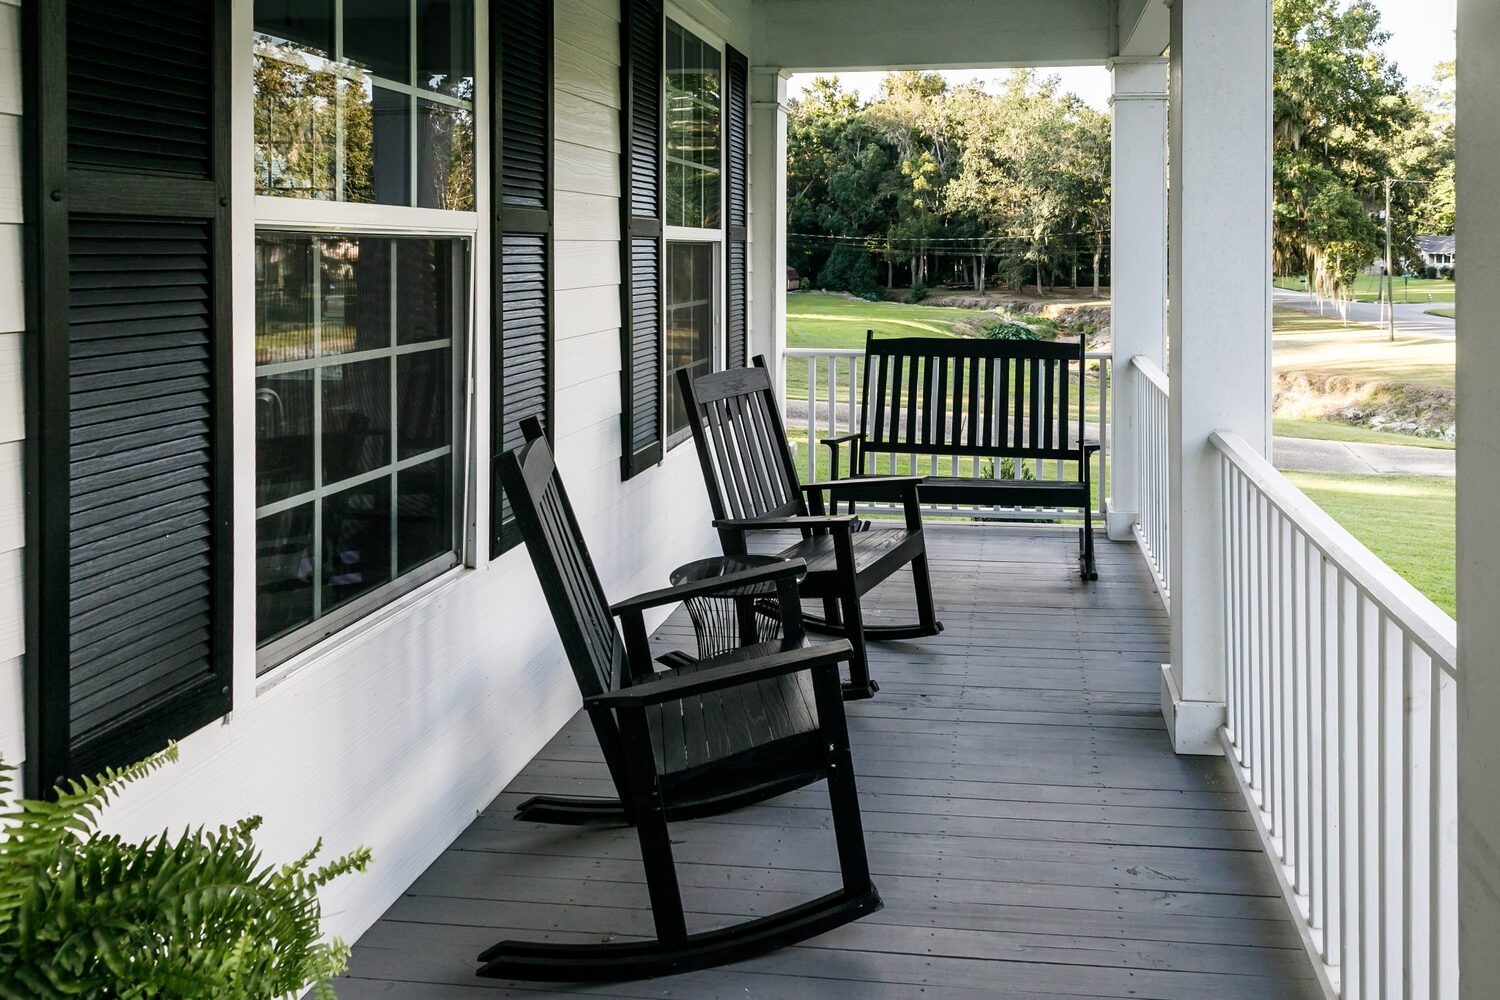 Porch builders Winnetka team added a beautiful white wooden porch to the home